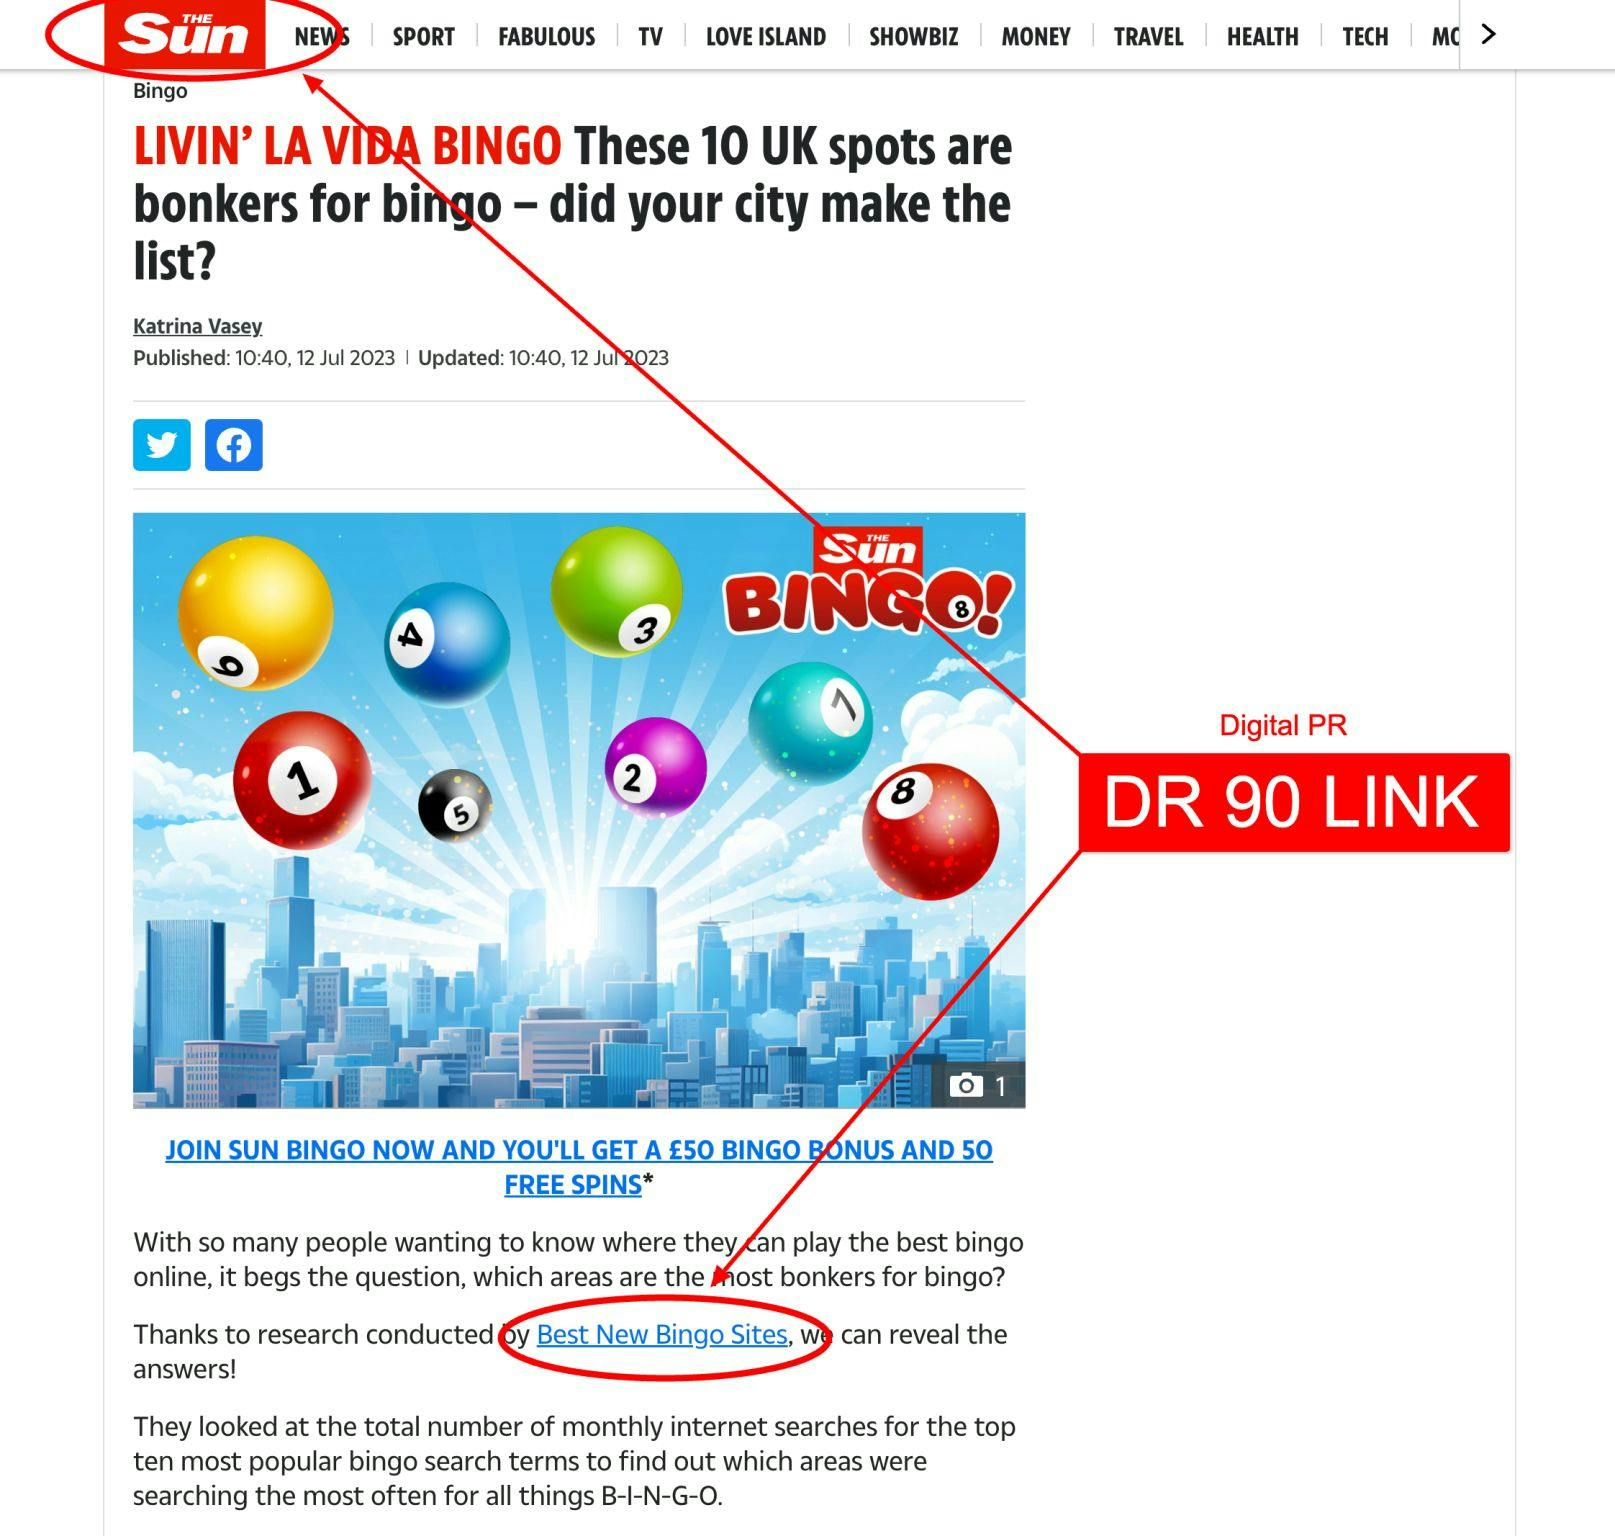 How Search Intelligence used Google Keyword Planner to land links from The Sun, MSN, and more publications for their Bingo client